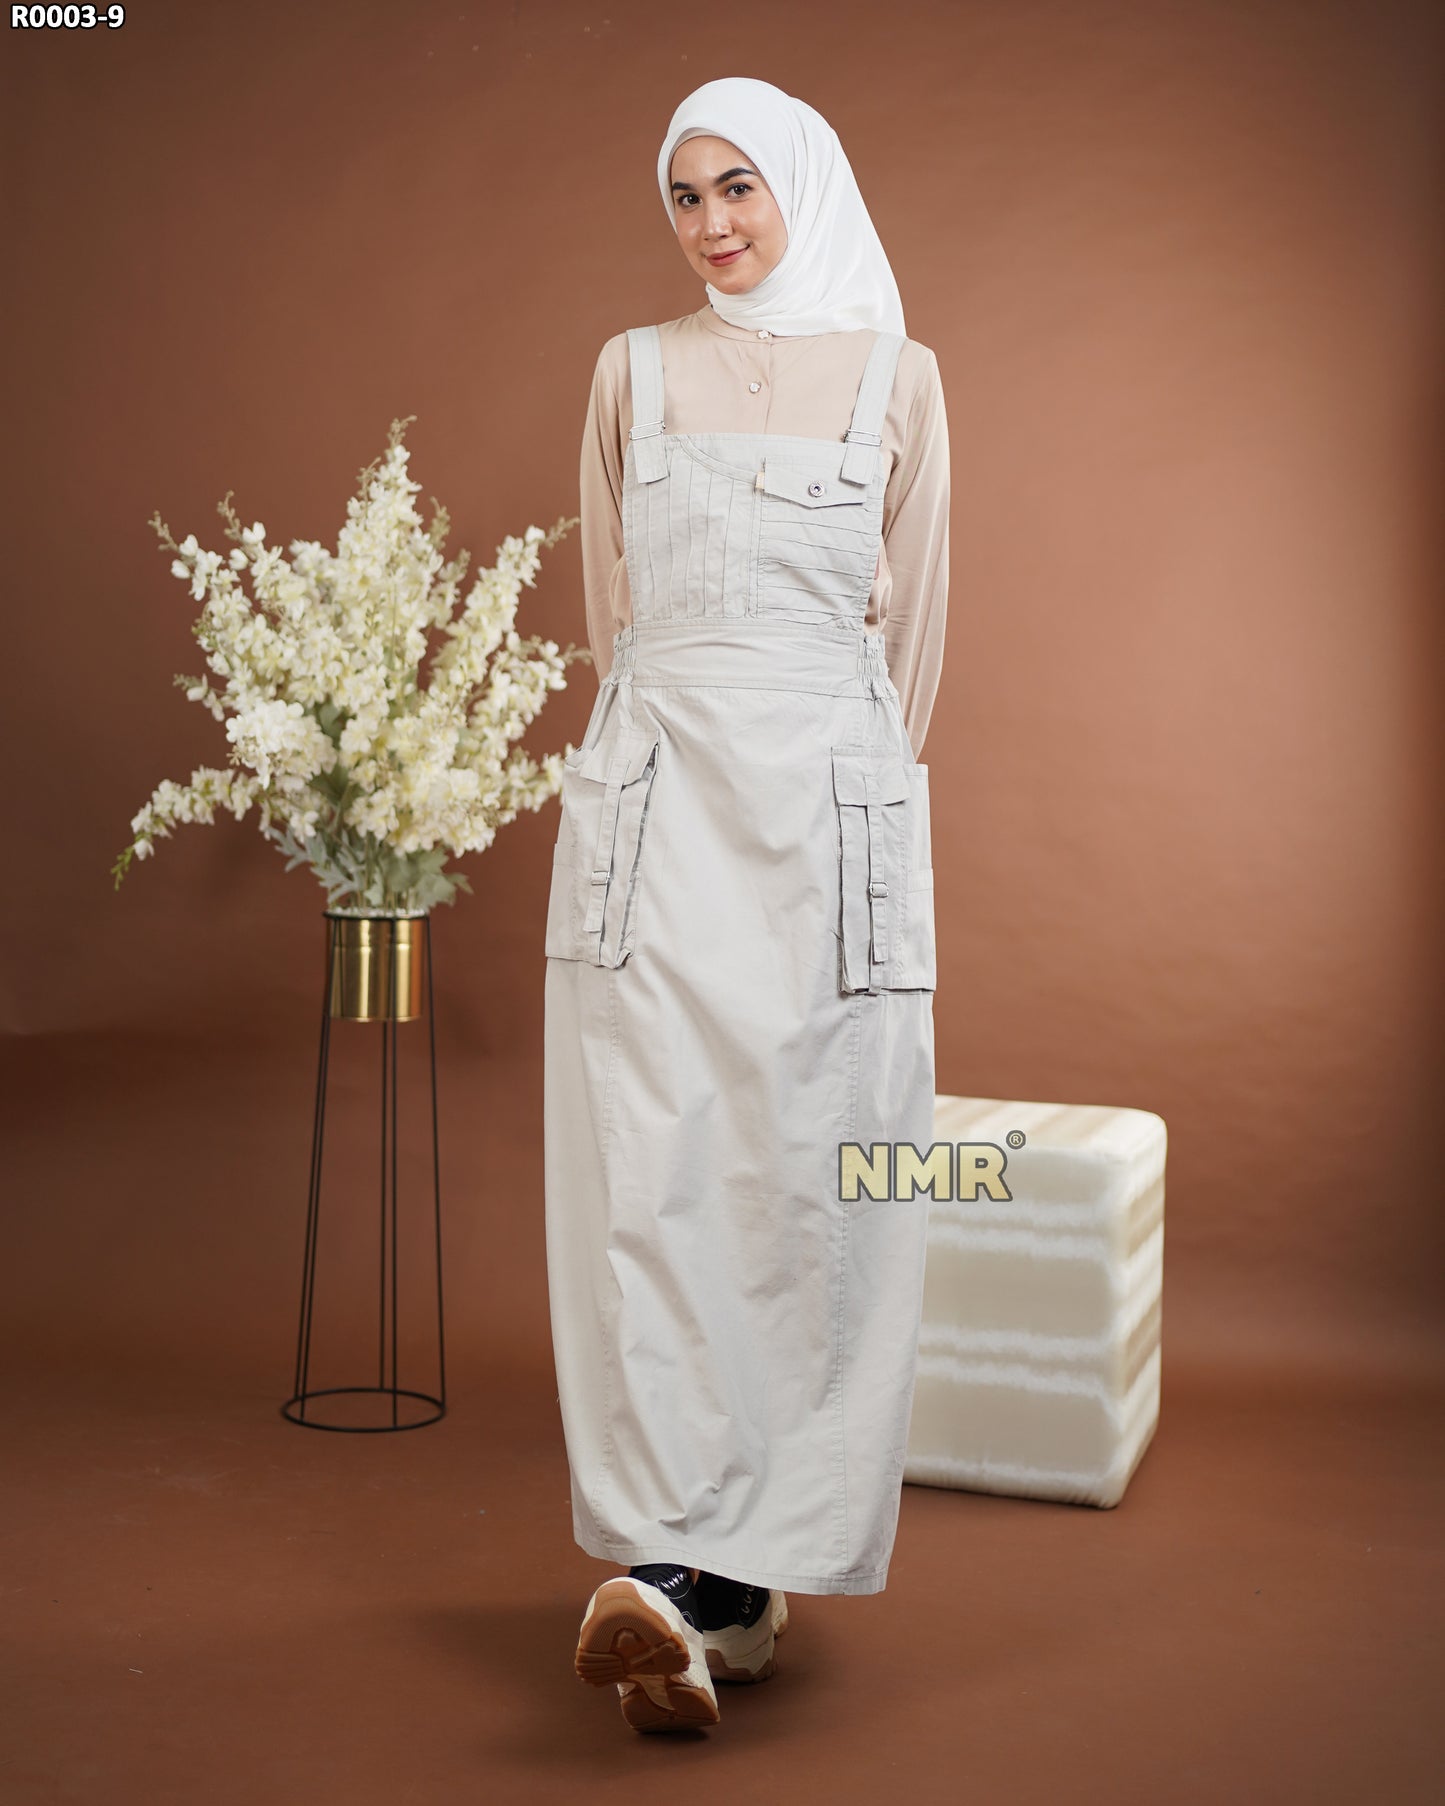 NMR Gamis Jumpsuit Overall Baby Canvas Vol R003-9